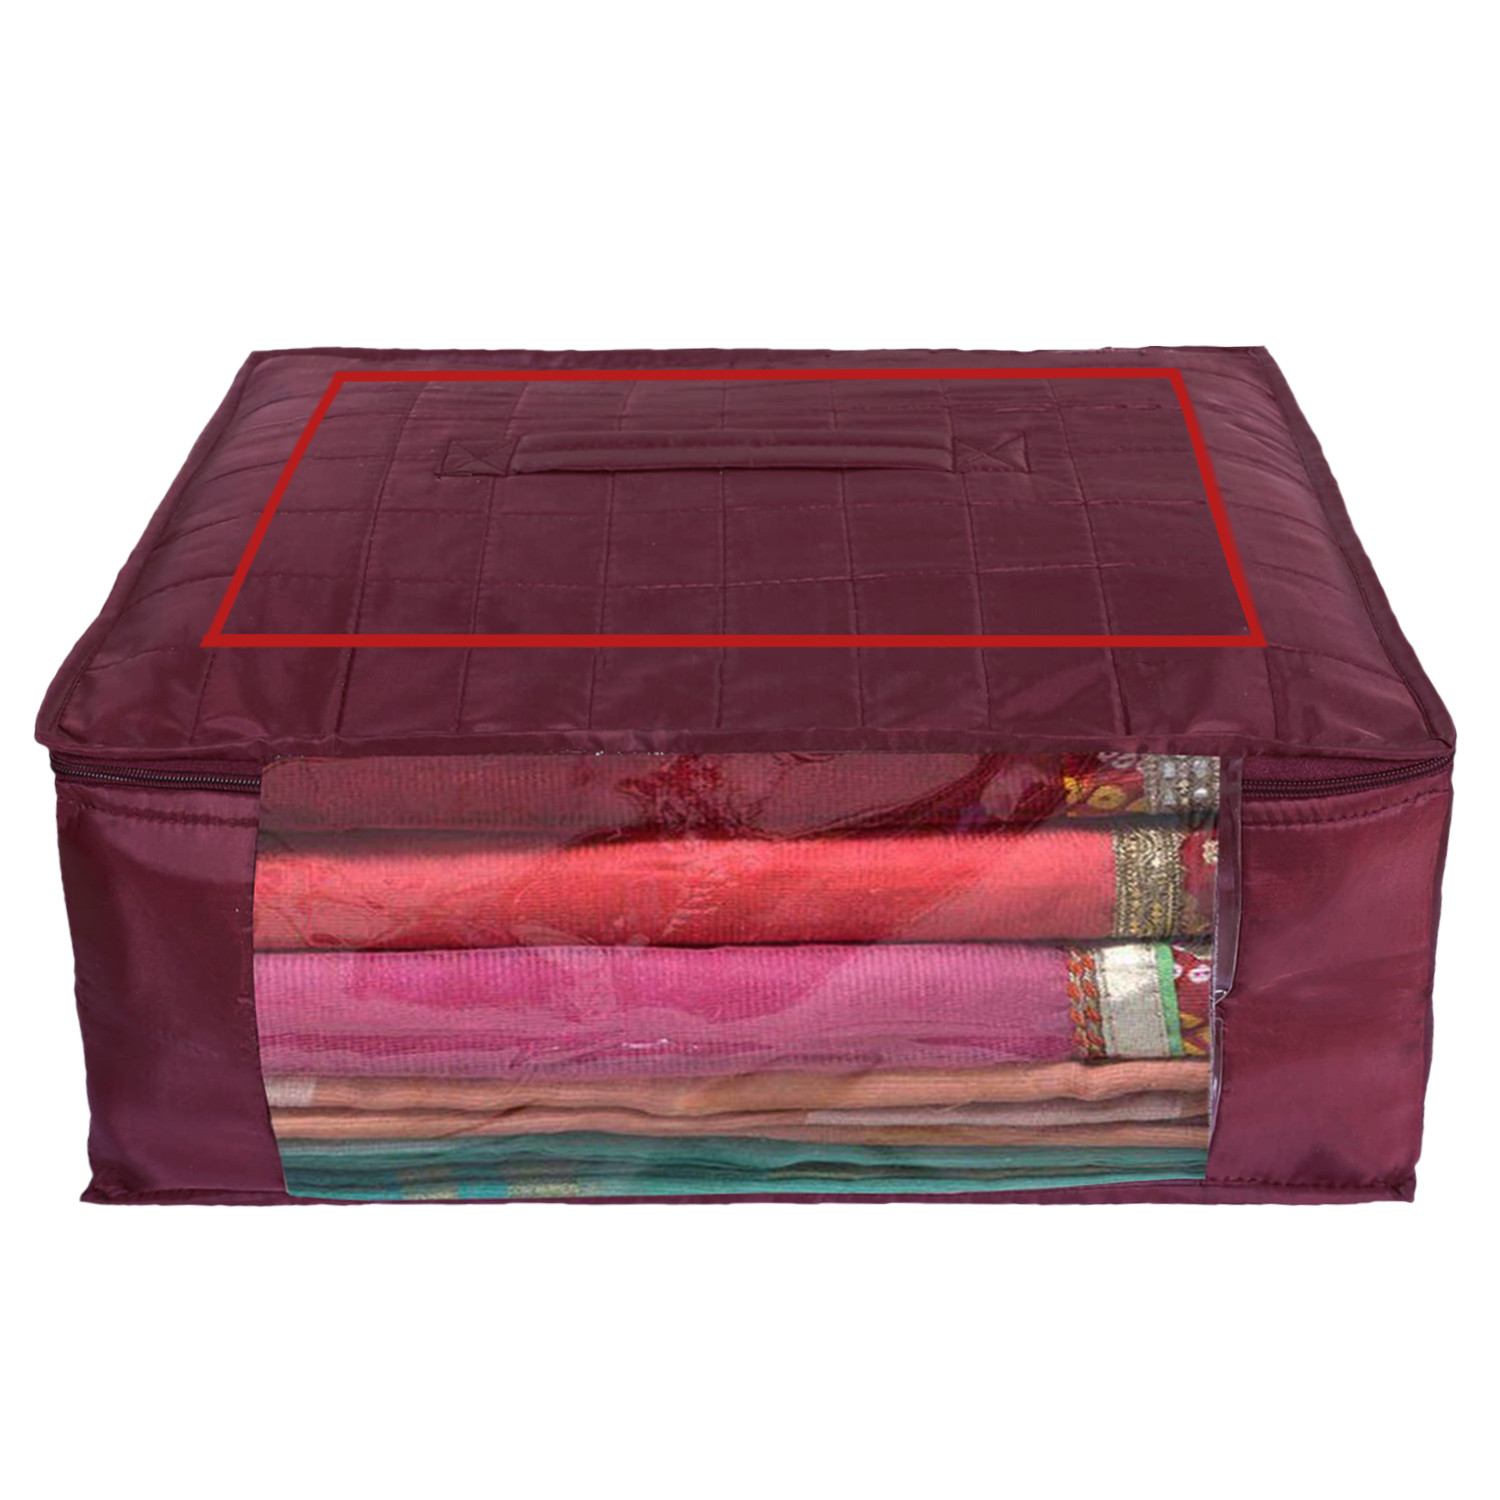 Kuber Industries Saree Cover | Polyester Saree Cover For Woman | Wardrobe Organizer for Clothes Storage | Transparent window Saree Cover | Extra Large | Maroon